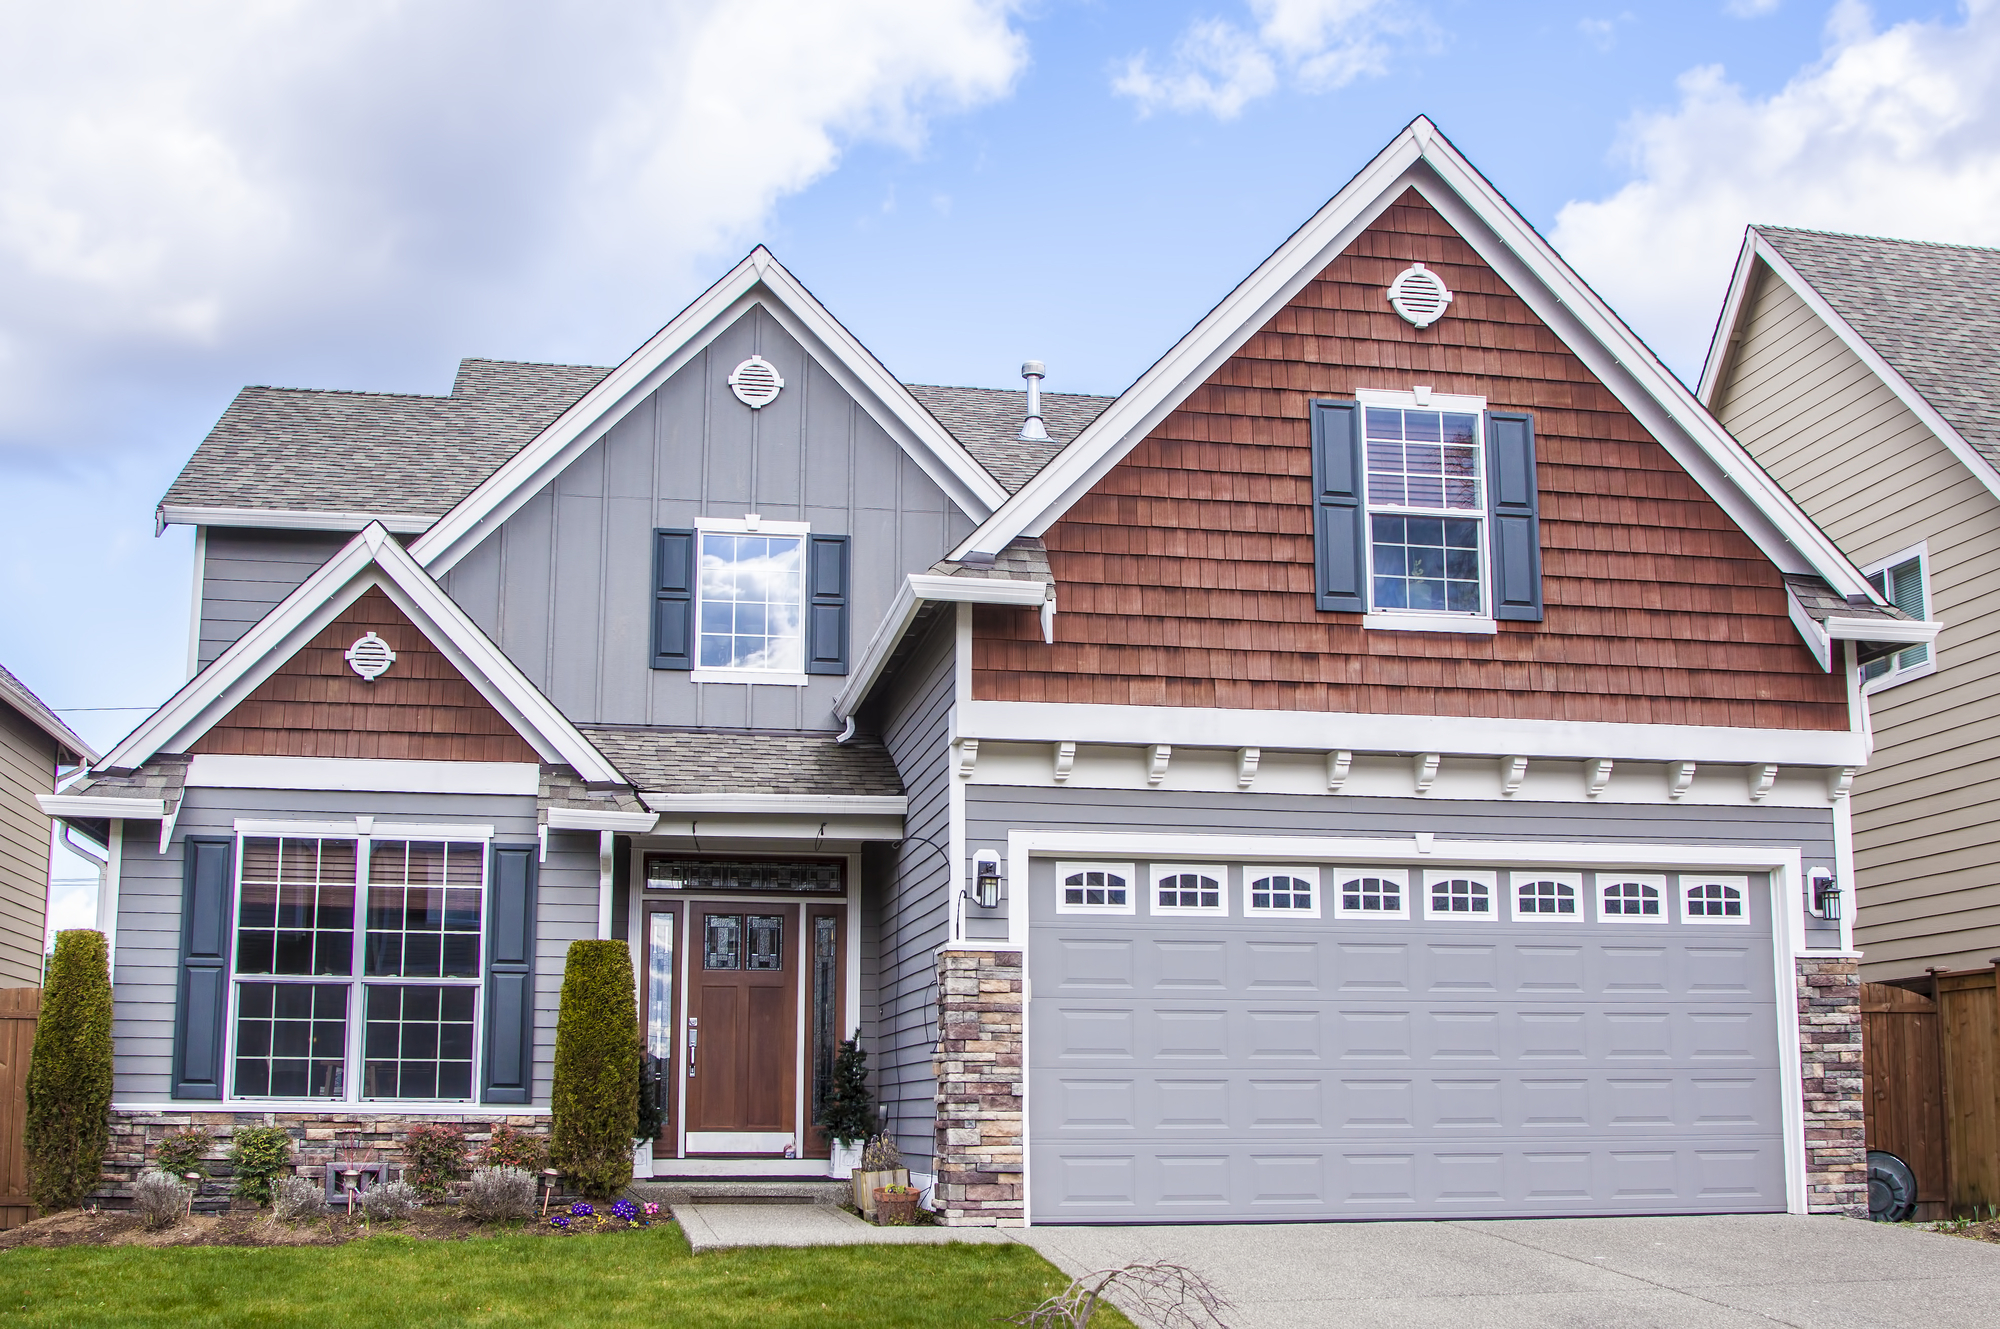 Are You In Need Of A Garage Door Repair Company?